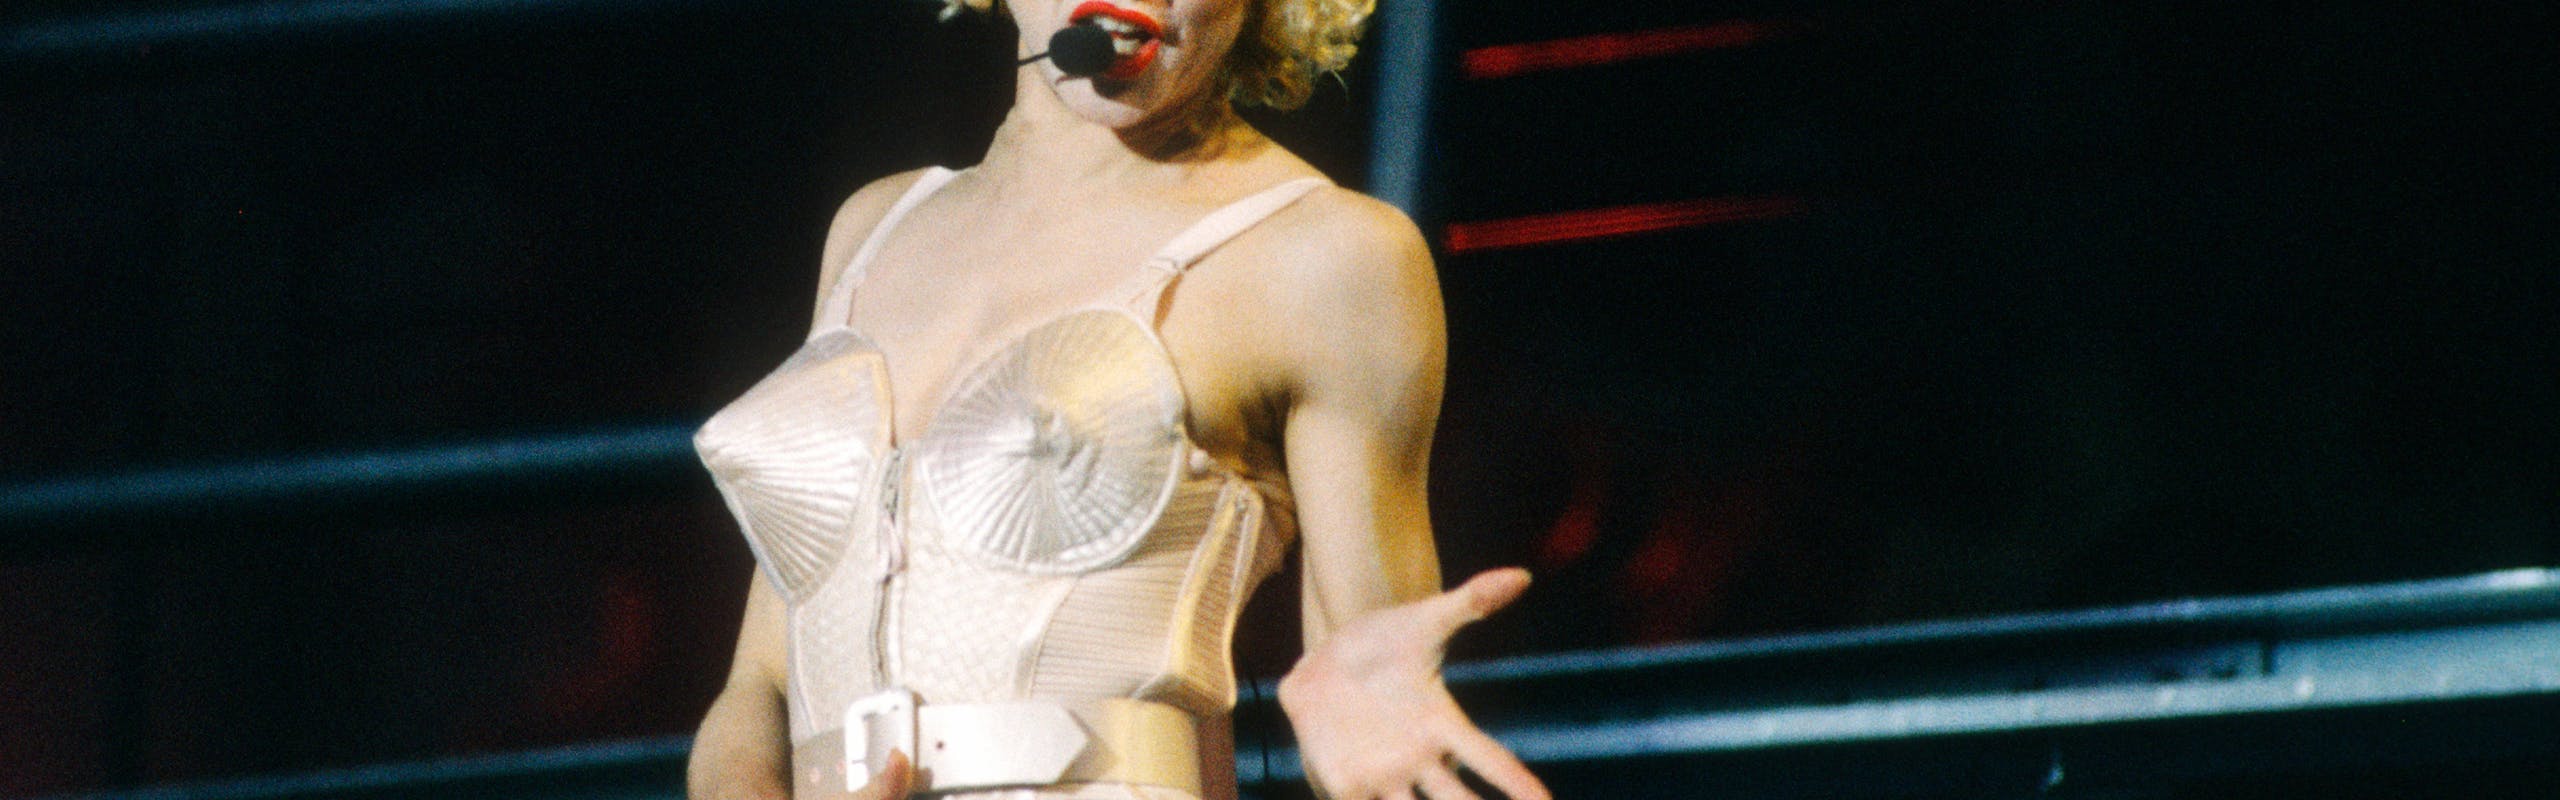 Madonna during her Blonde Ambition tour